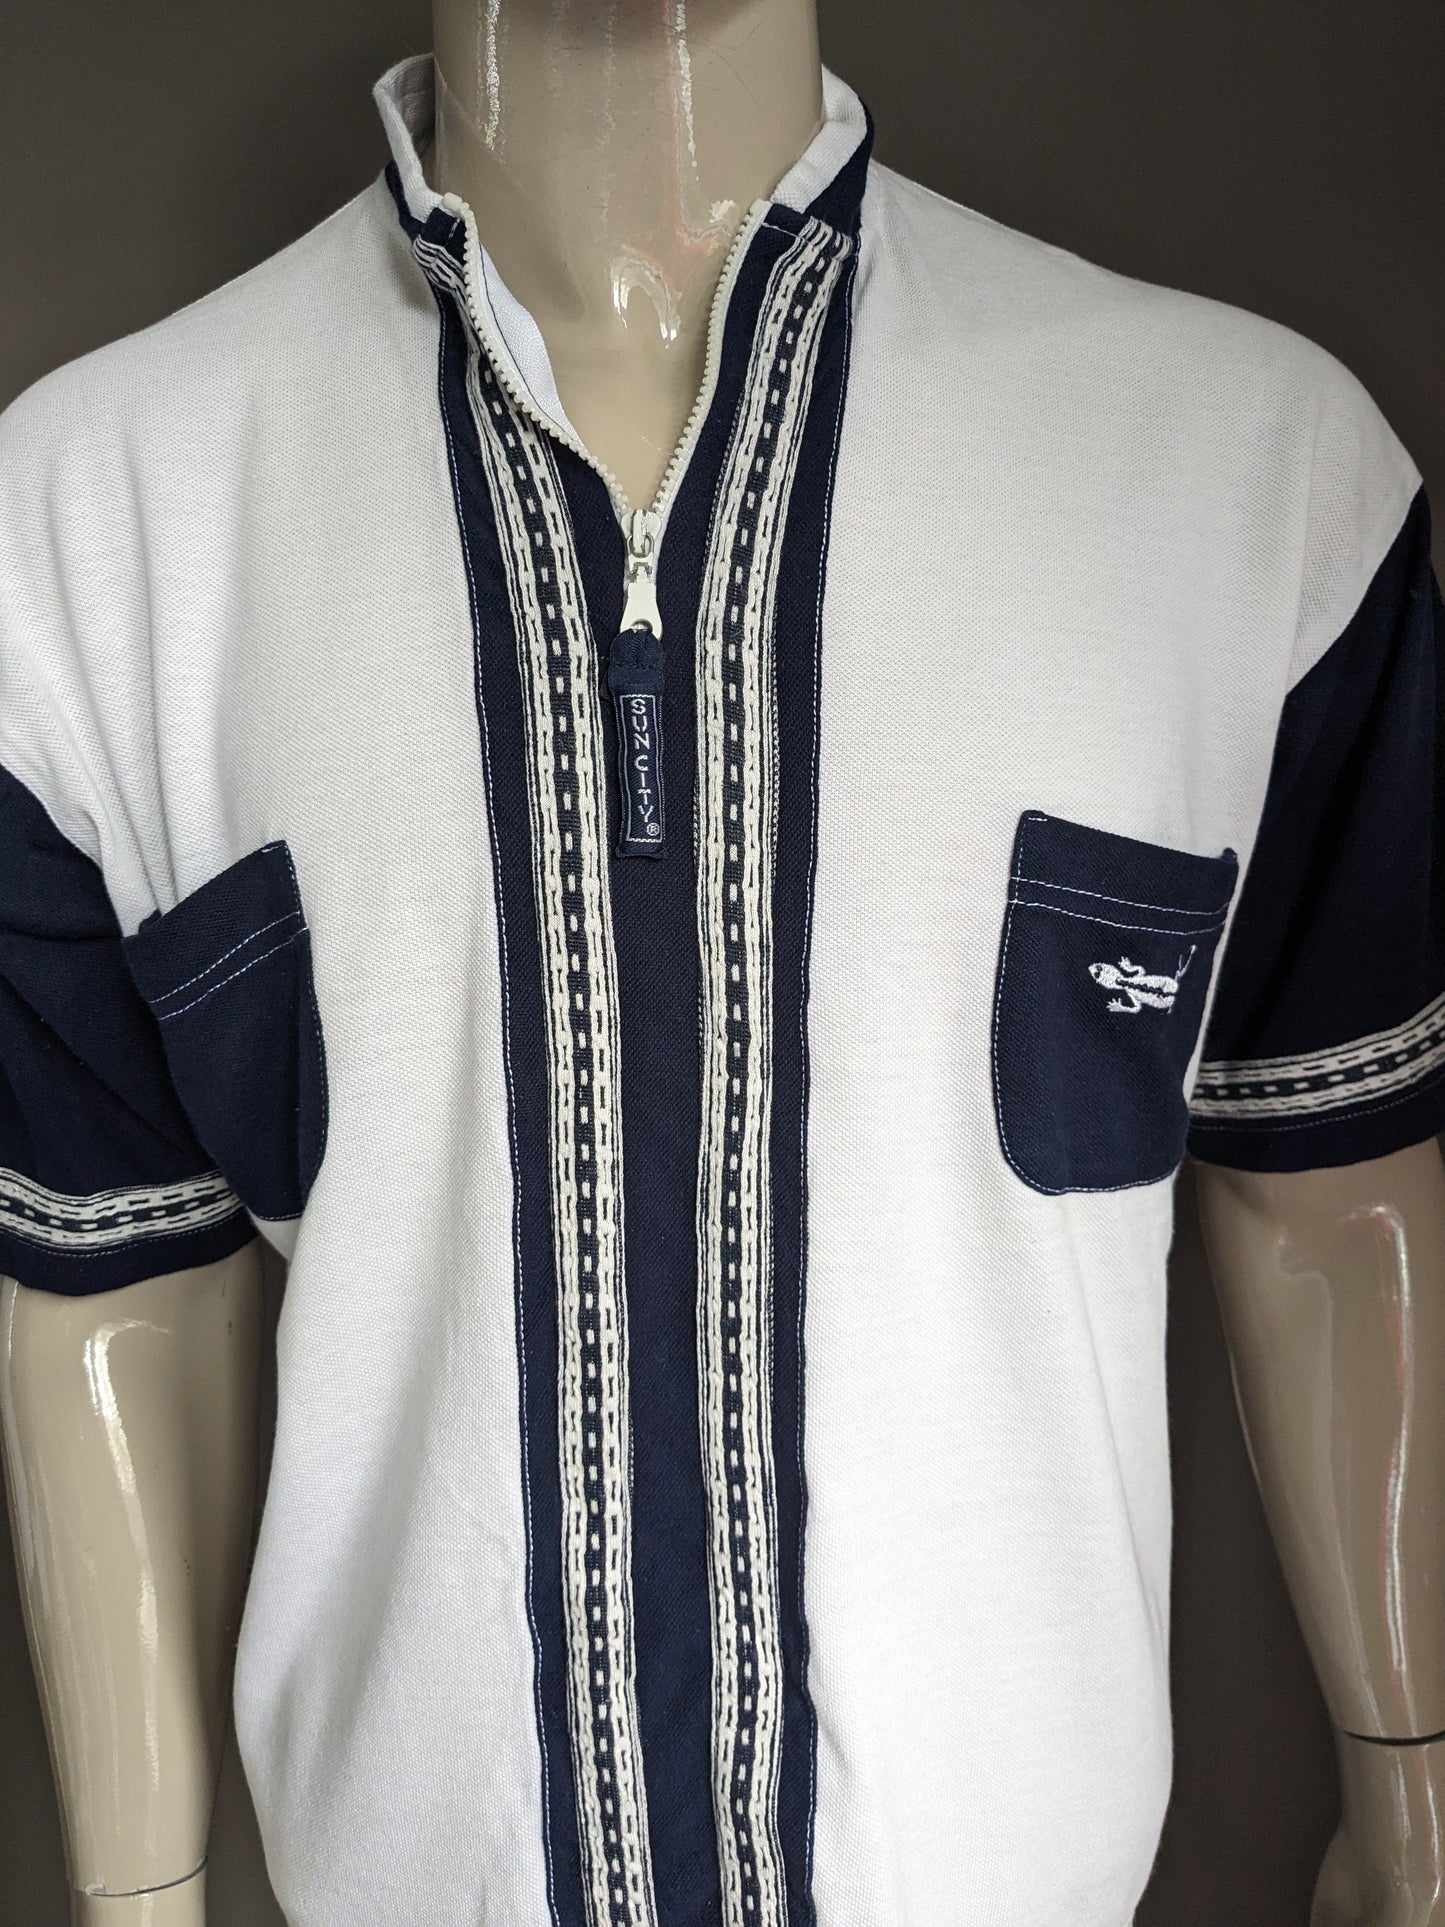 Vintage Sun City Polo with zipper. Blue white colored. Size XL.